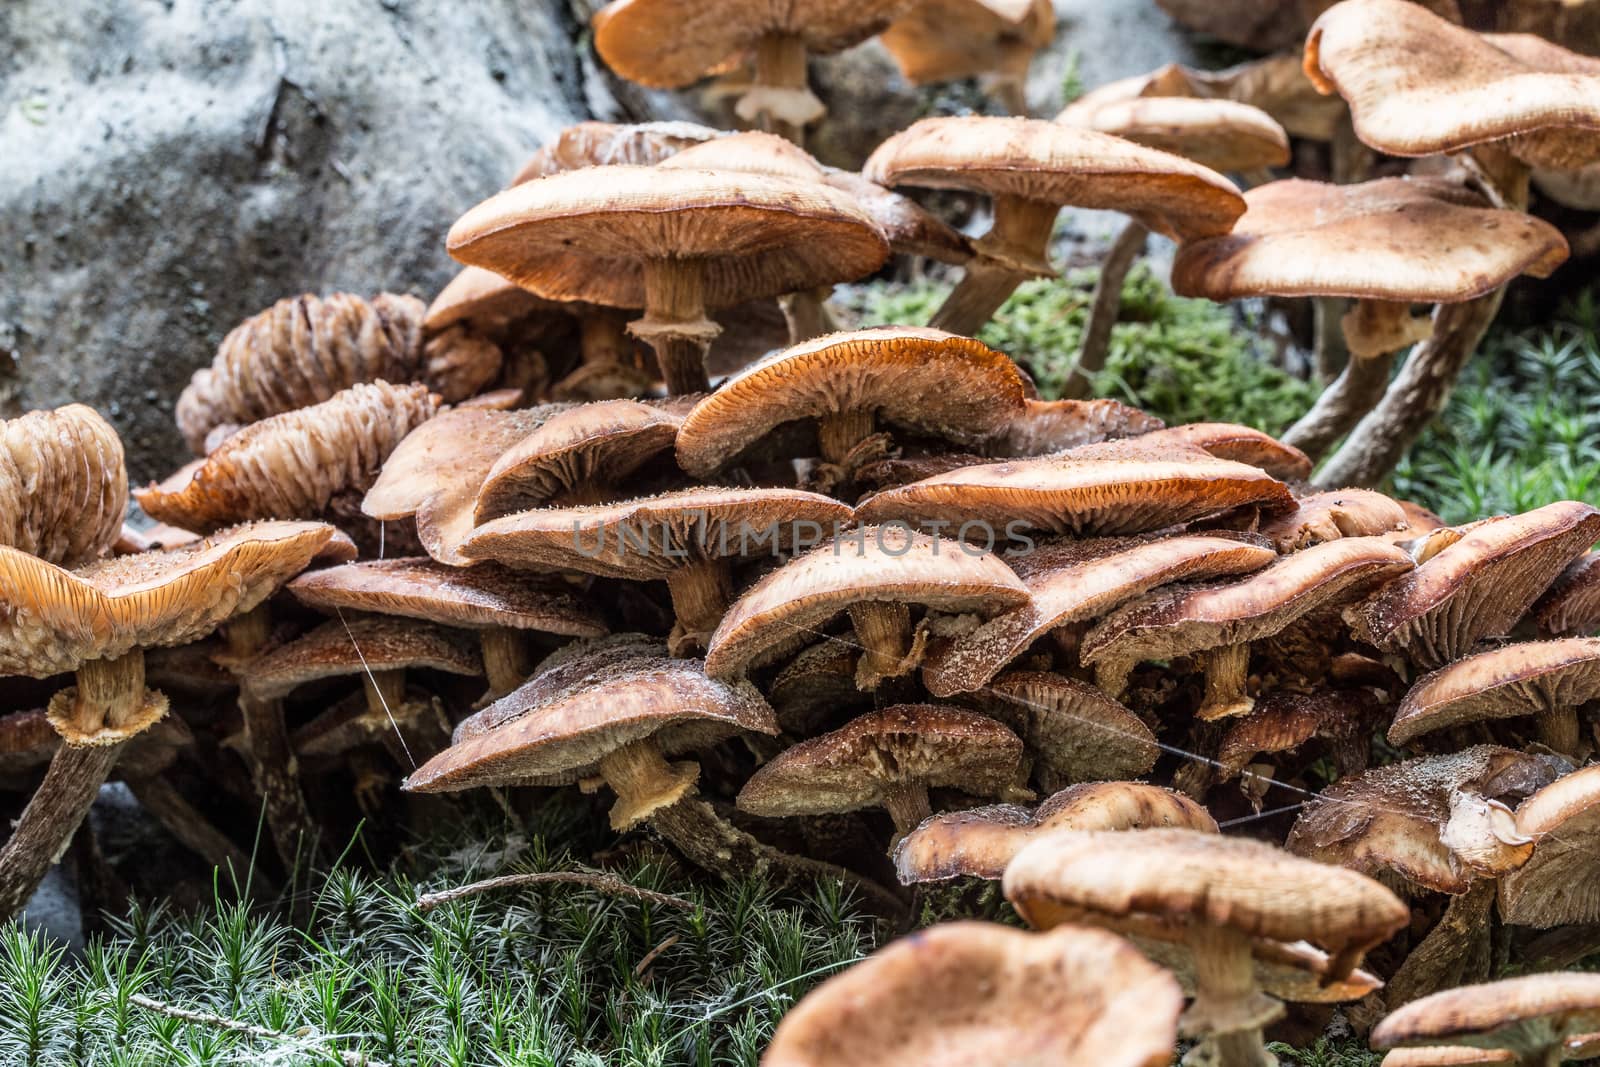 Mushrooms on forest floor in the foliage by Dr-Lange